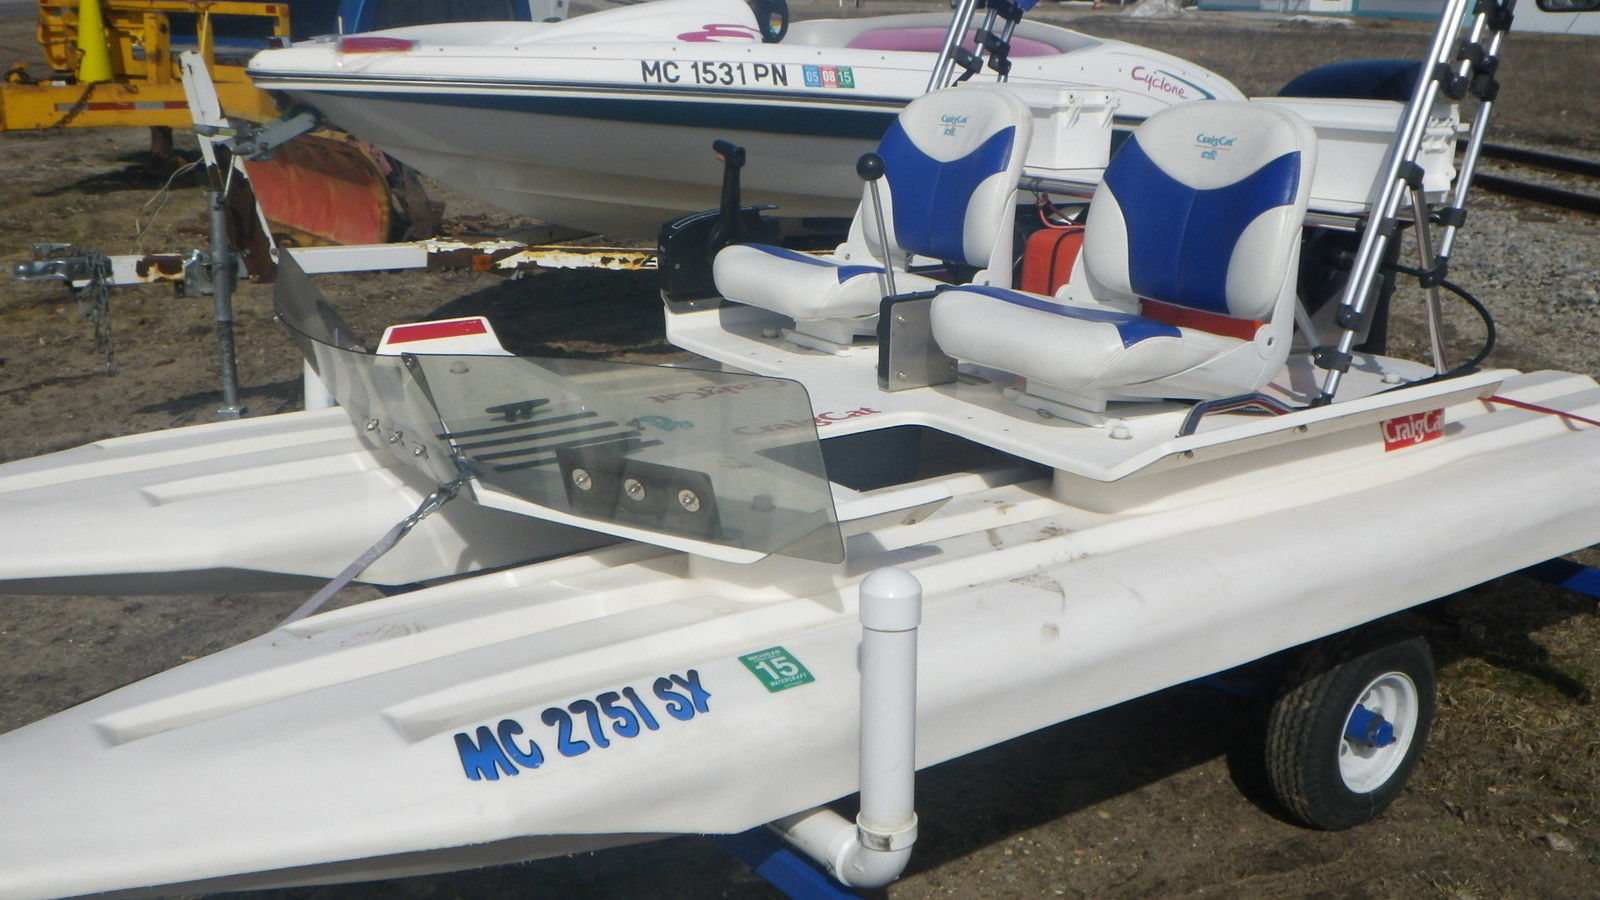 CRAIGCAT CATAMARN 2005 for sale for 6,299